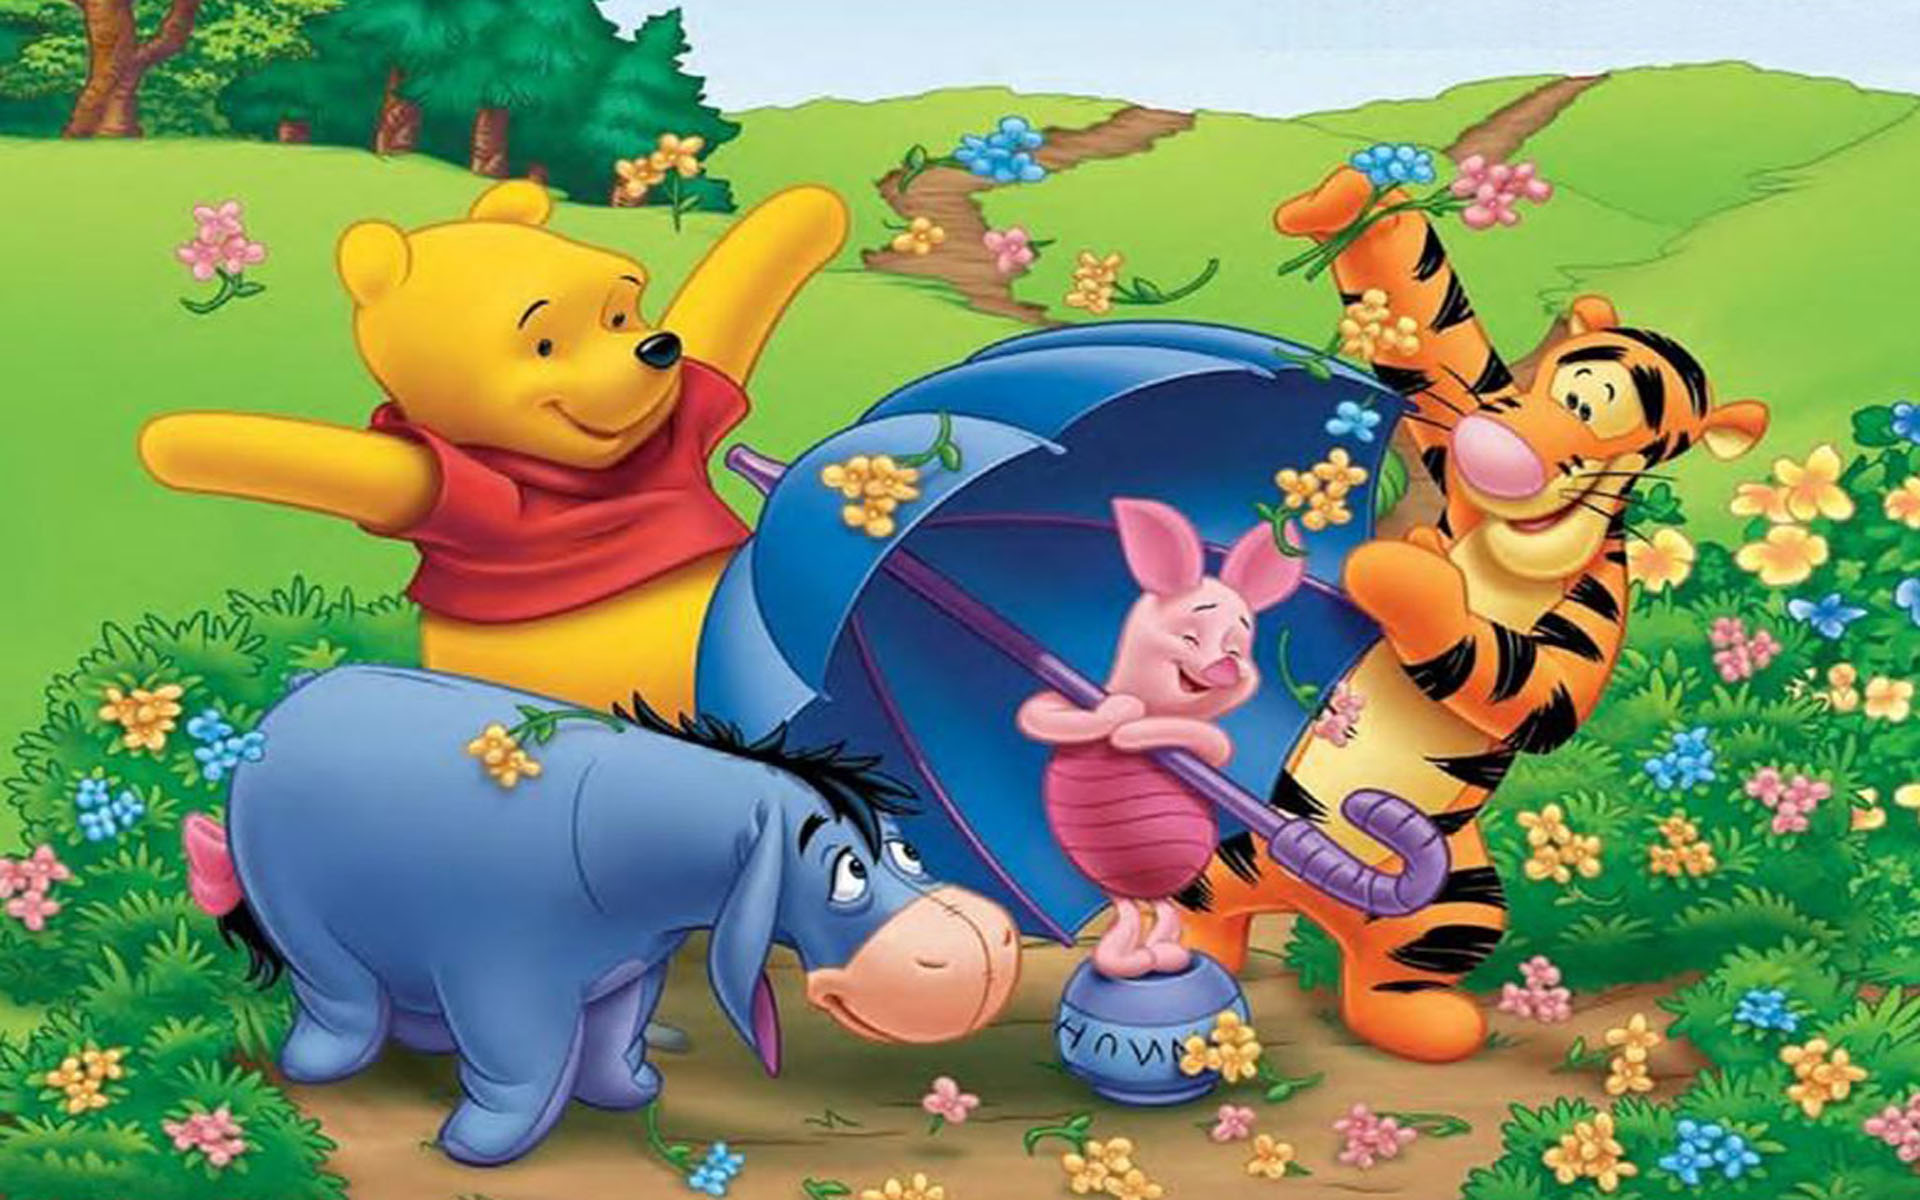 Tigger Eeyore Piglet And Winnie The Pooh Cartoon Spring Garden Flowers  Umbrella Hd Wallpaper For Laptop And Tablet 1920x1200 : 